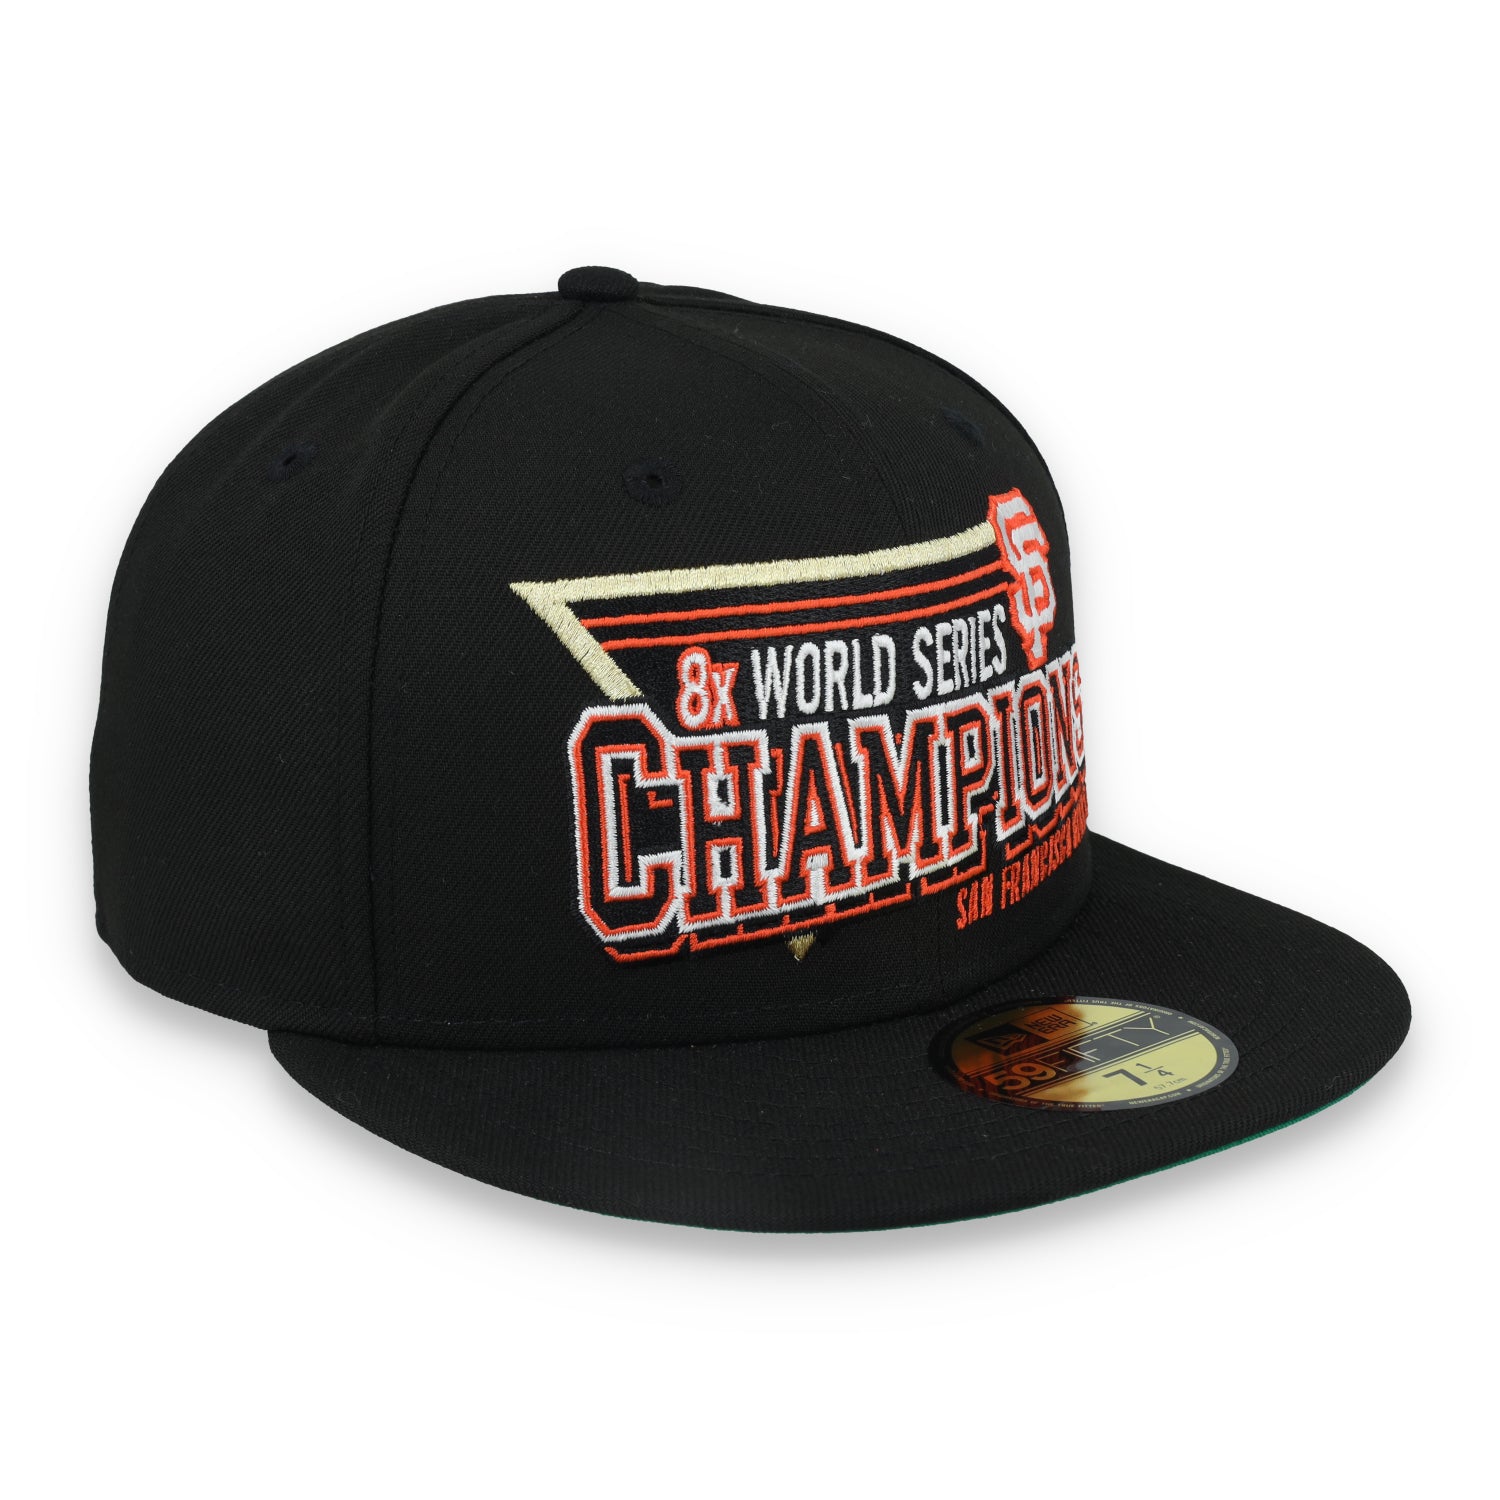 New Era San Francisco Giants 8x Championship Throwback 59FIFTY Fitted Hat